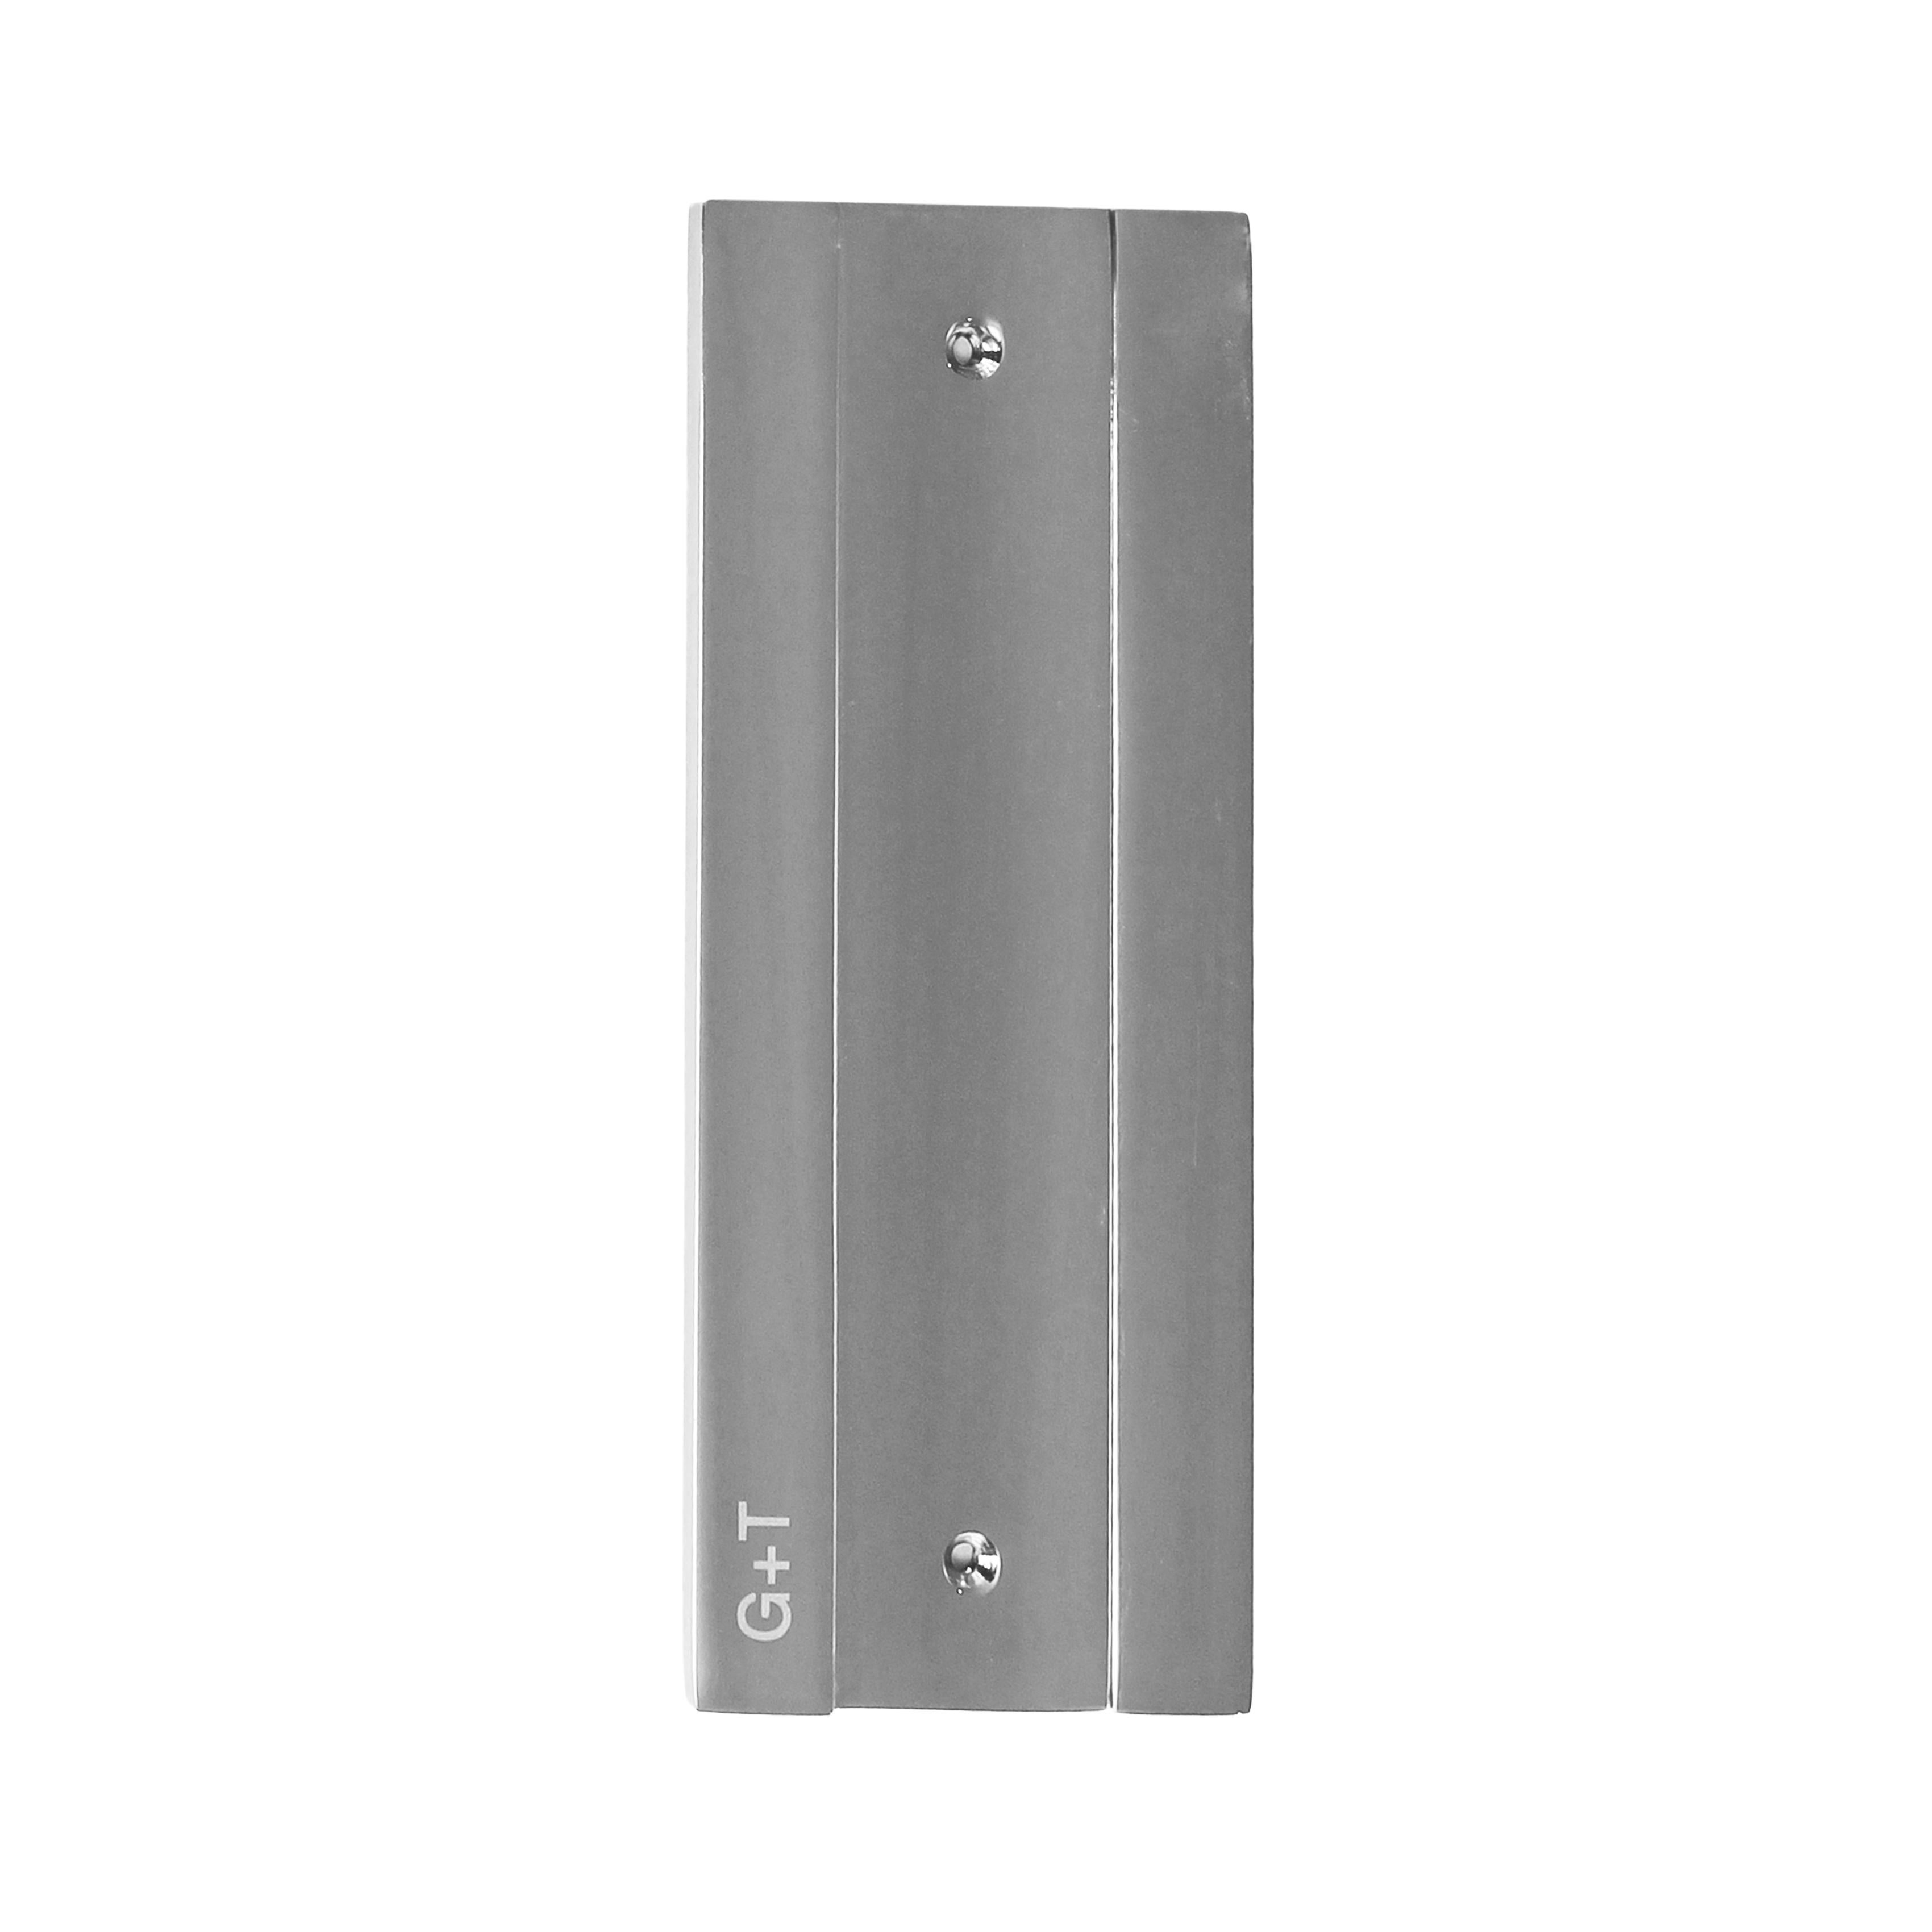 G+T Battery Accessory, Metal Plate for Wall in Polished Nickel For Sale